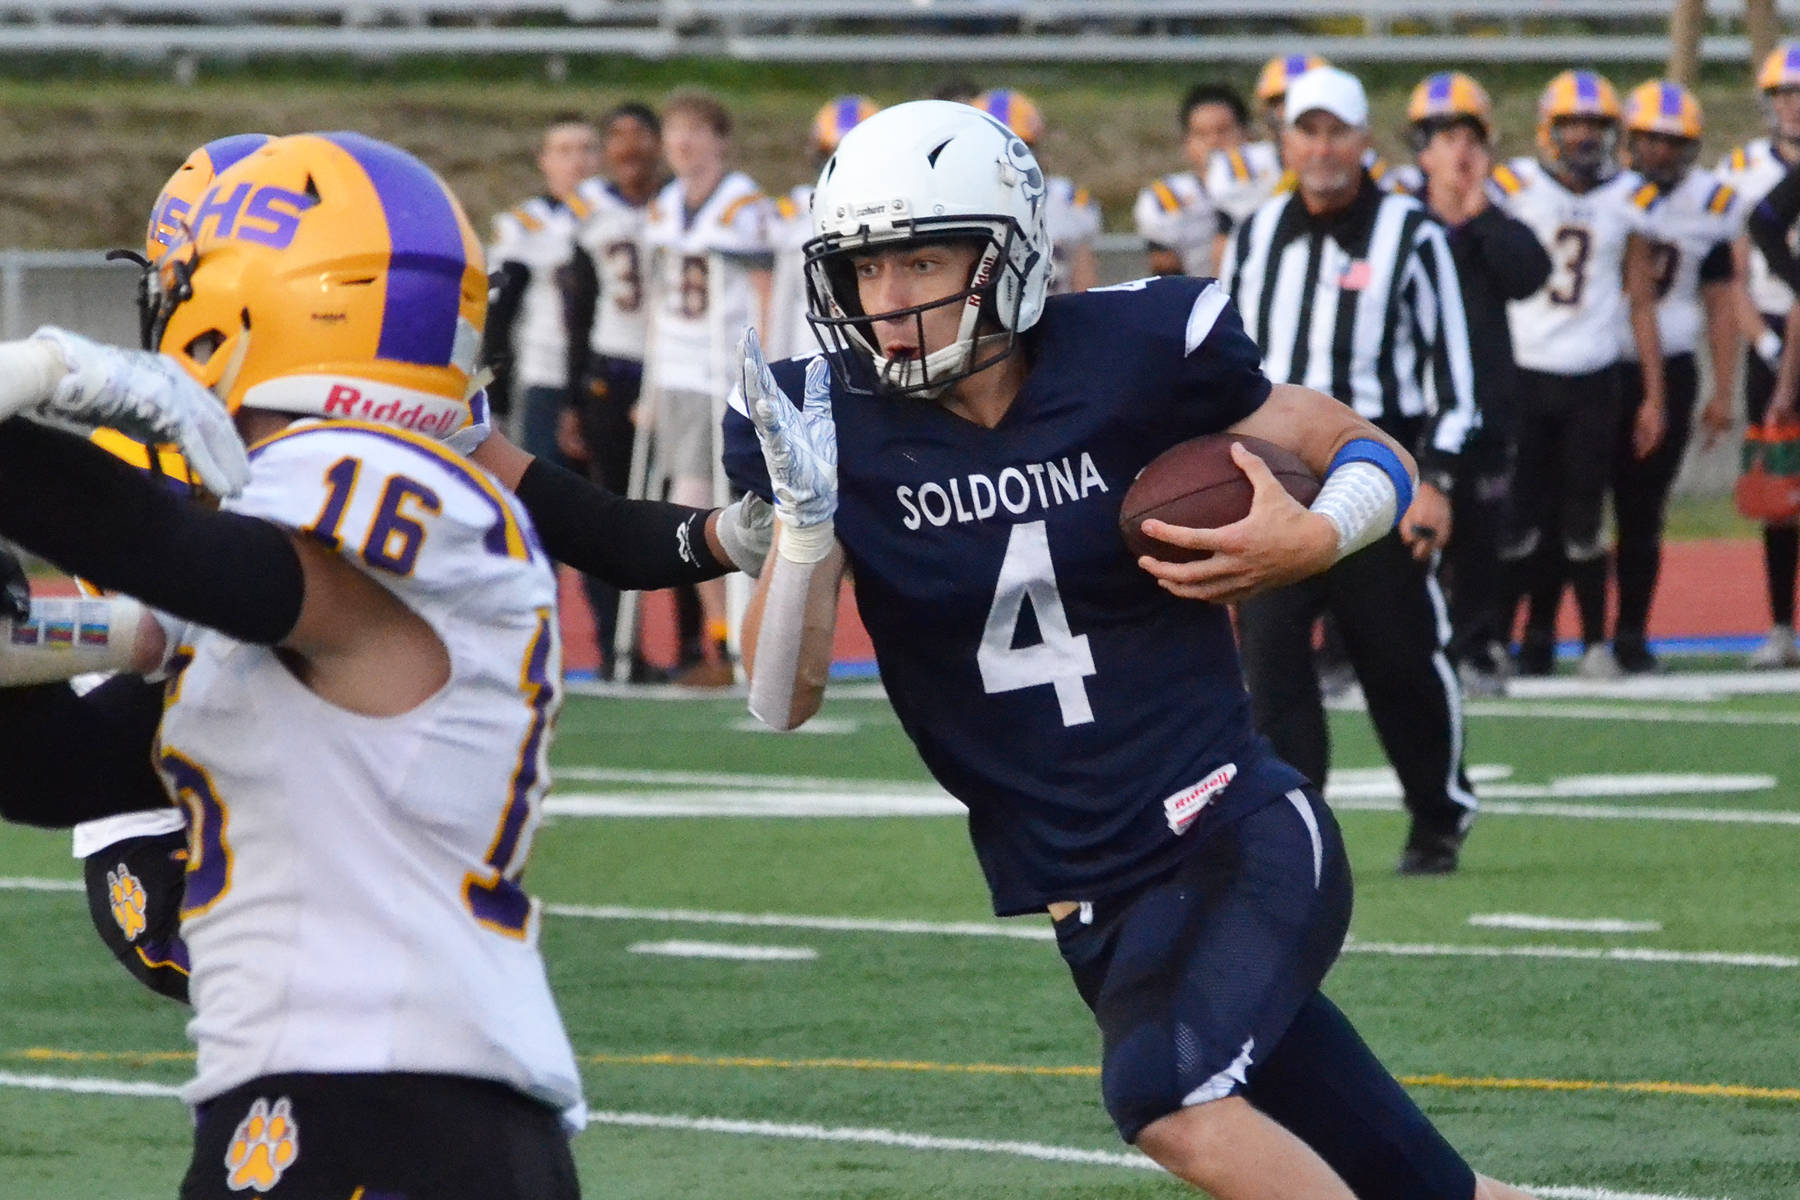 Soldotna quarterback Jersey Truesdell runs the ball against the Lathrop Malamutes Friday, Sept. 13, 2019, at Justin Maile Field in Soldotna. (Photo by Joey Klecka/Peninsula Clarion)